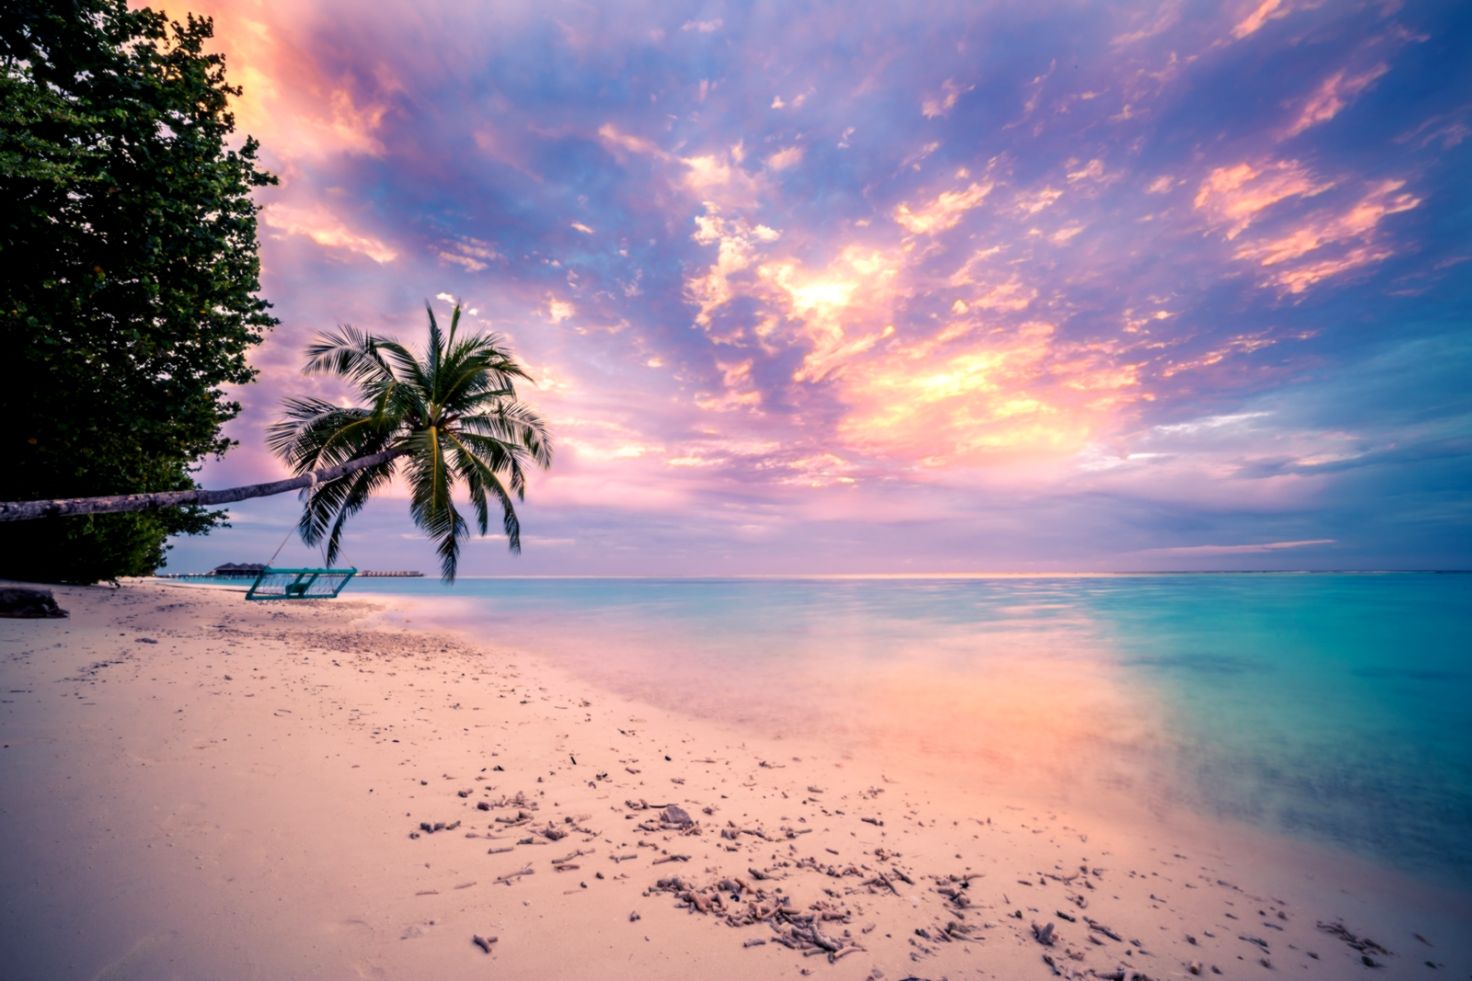 Tropical Beach Sunset Wallpaper And Background Image - Sunset Wallpaper Tropical Beach